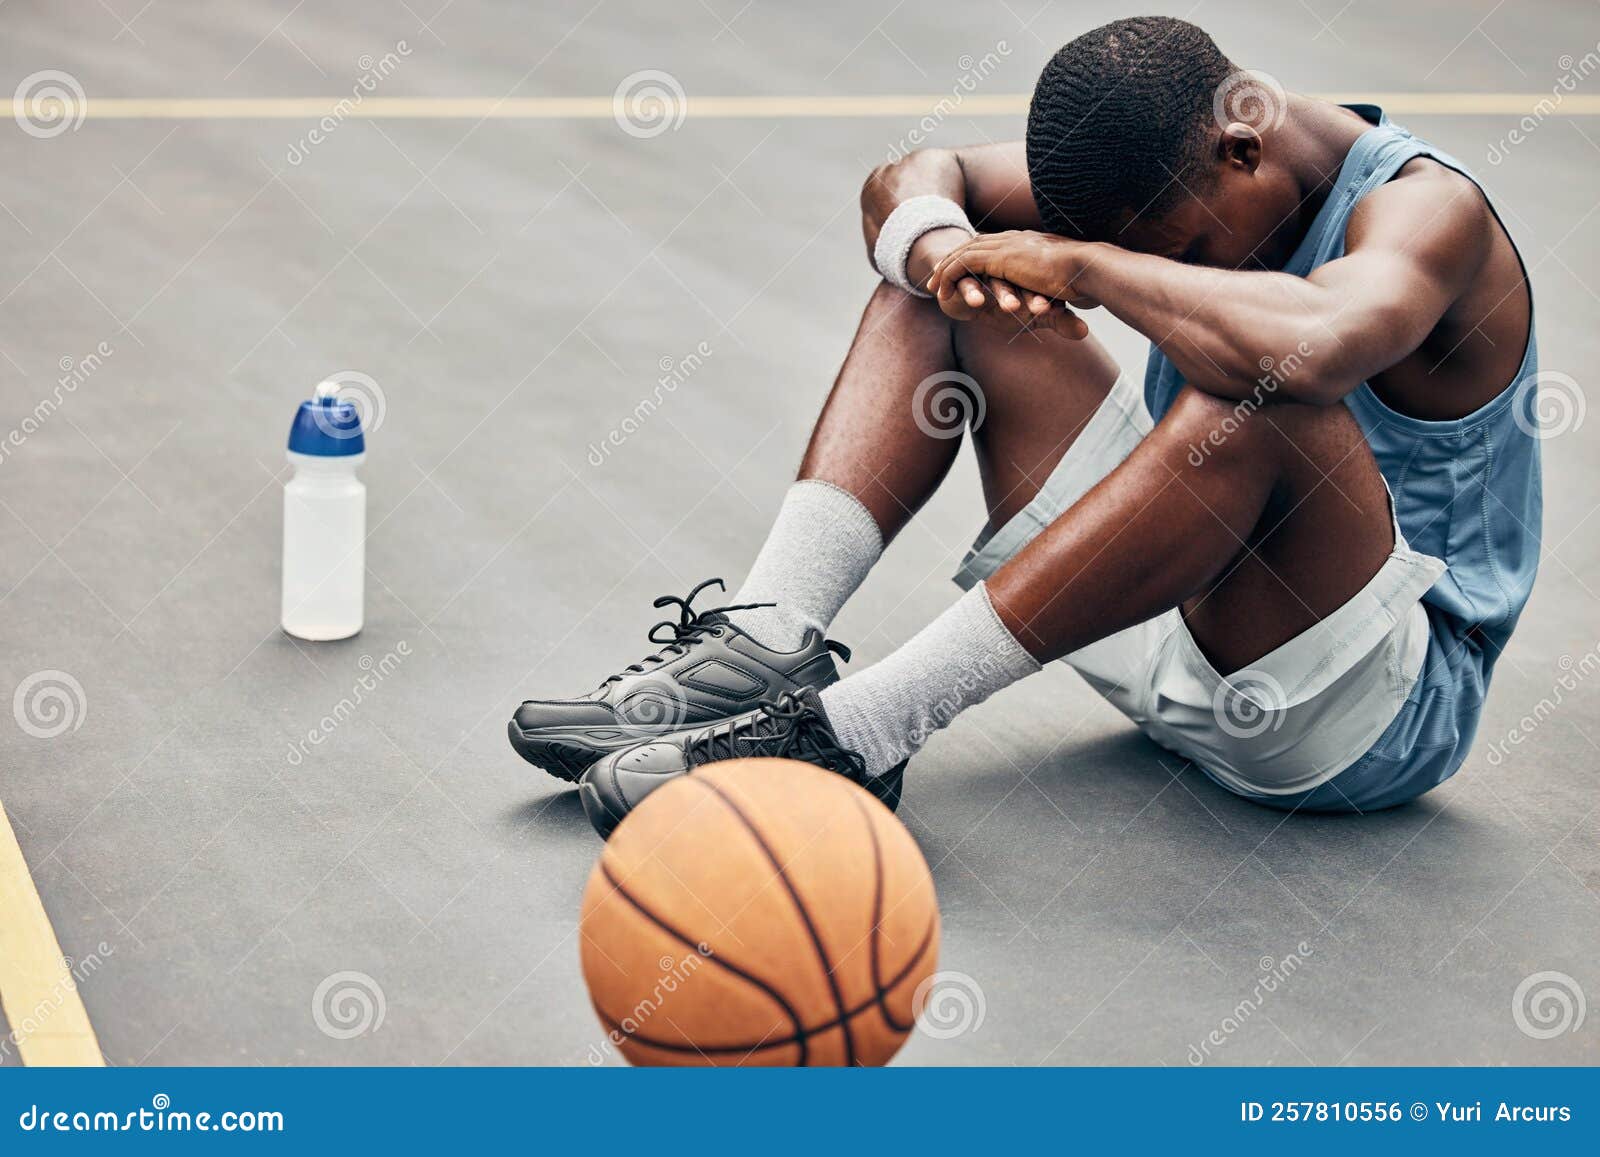 What Are Those Leggings Basketball Players Weary